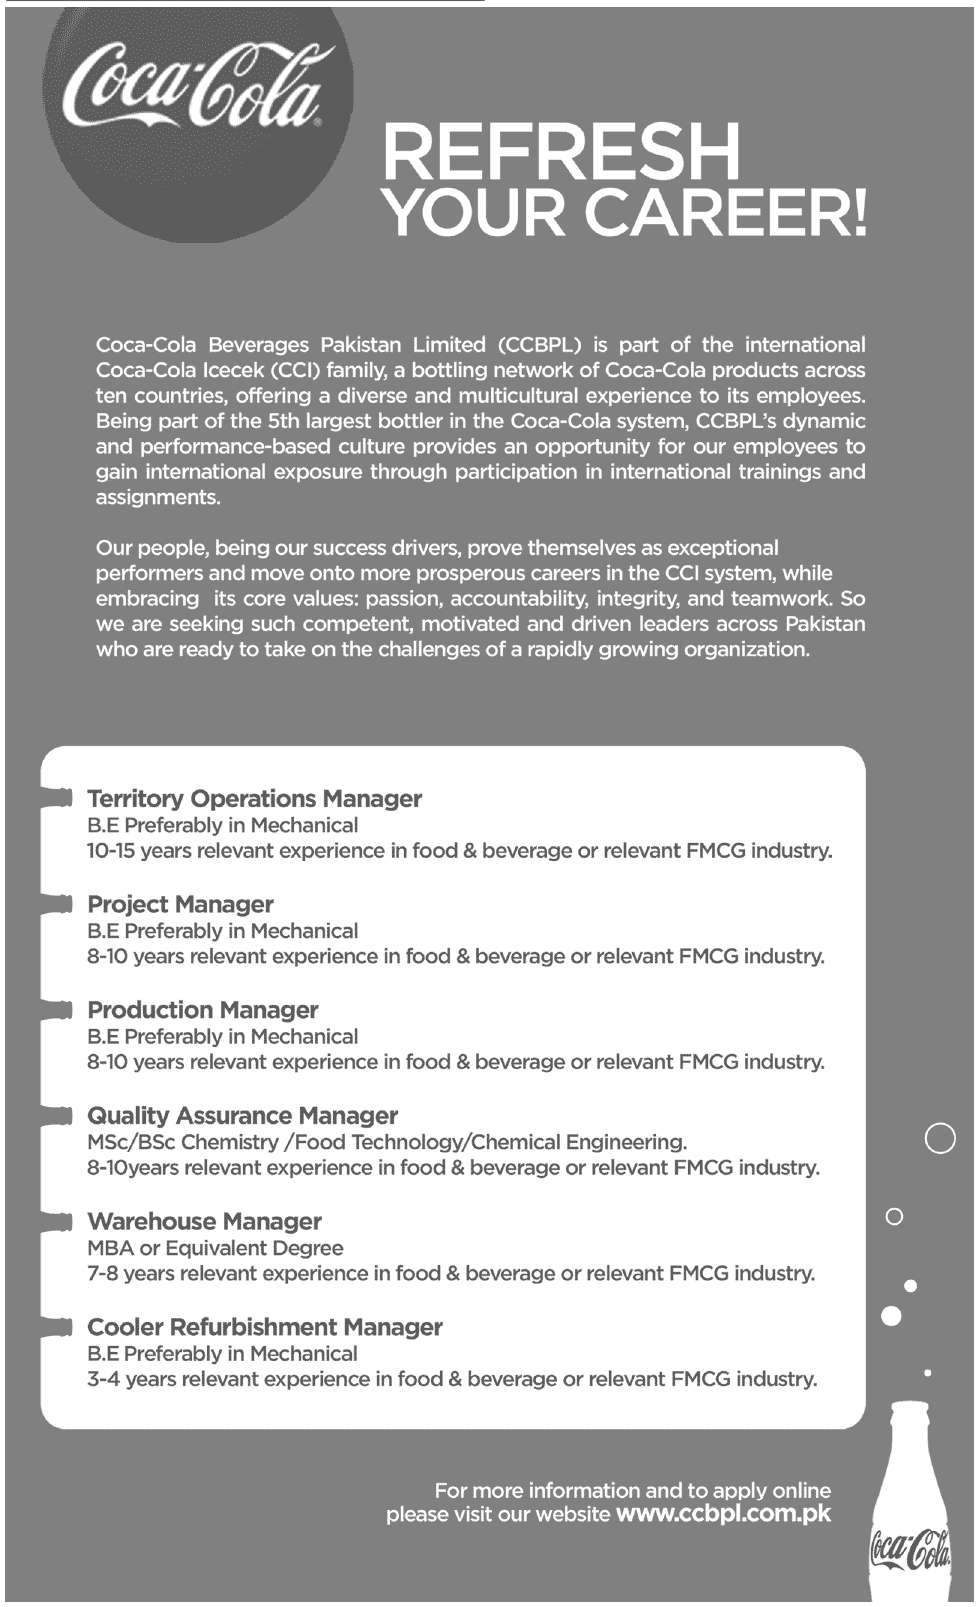 Coca-Cola Beverages Pakistan Limited Jobs 2012 for Managers